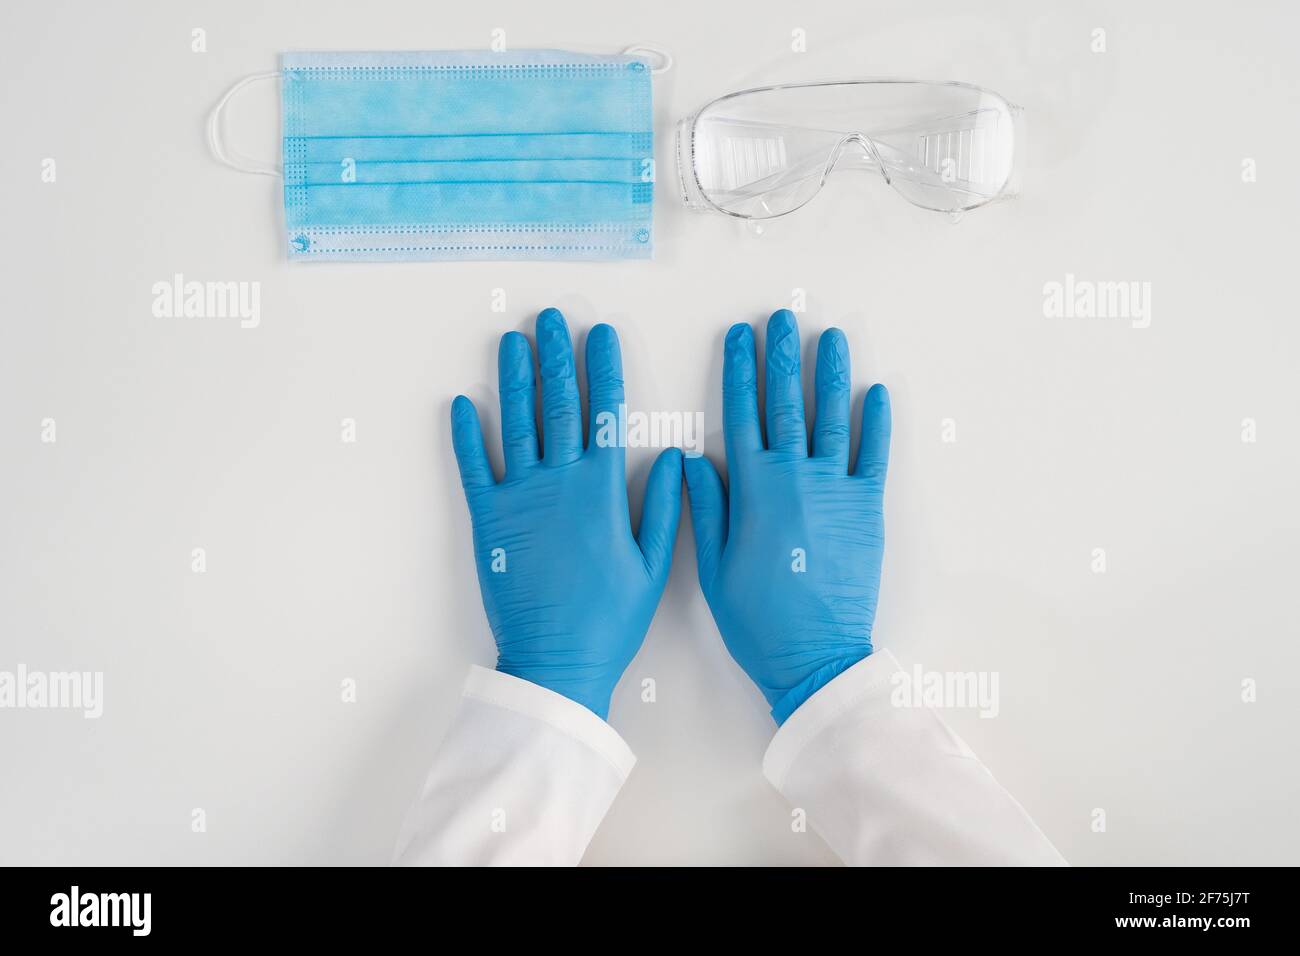 Medical concept of products for the protection of health care workers in hospitals and clinics. Stock Photo